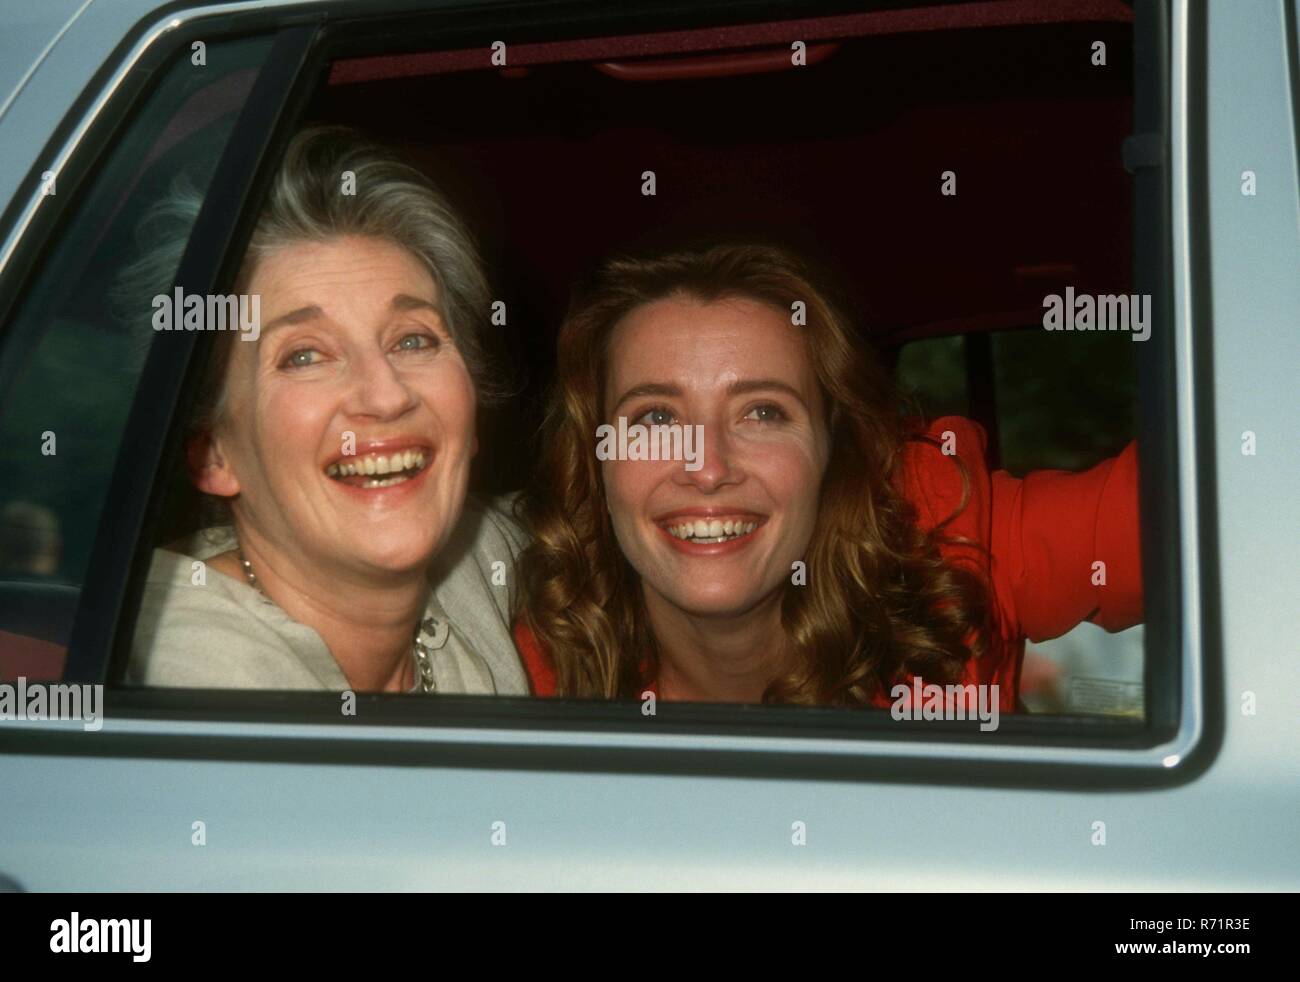 SANTA MONICA, CA - MARCH 27: Actress Emma Thompson and mother Phyllida Law attend the Eighth Annual IFP/West Independent Spirit Awards on March 27, 1993 at the Santa Monica Beach in Santa Monica, California. Photo by Barry King/Alamy Stock Photo Stock Photo